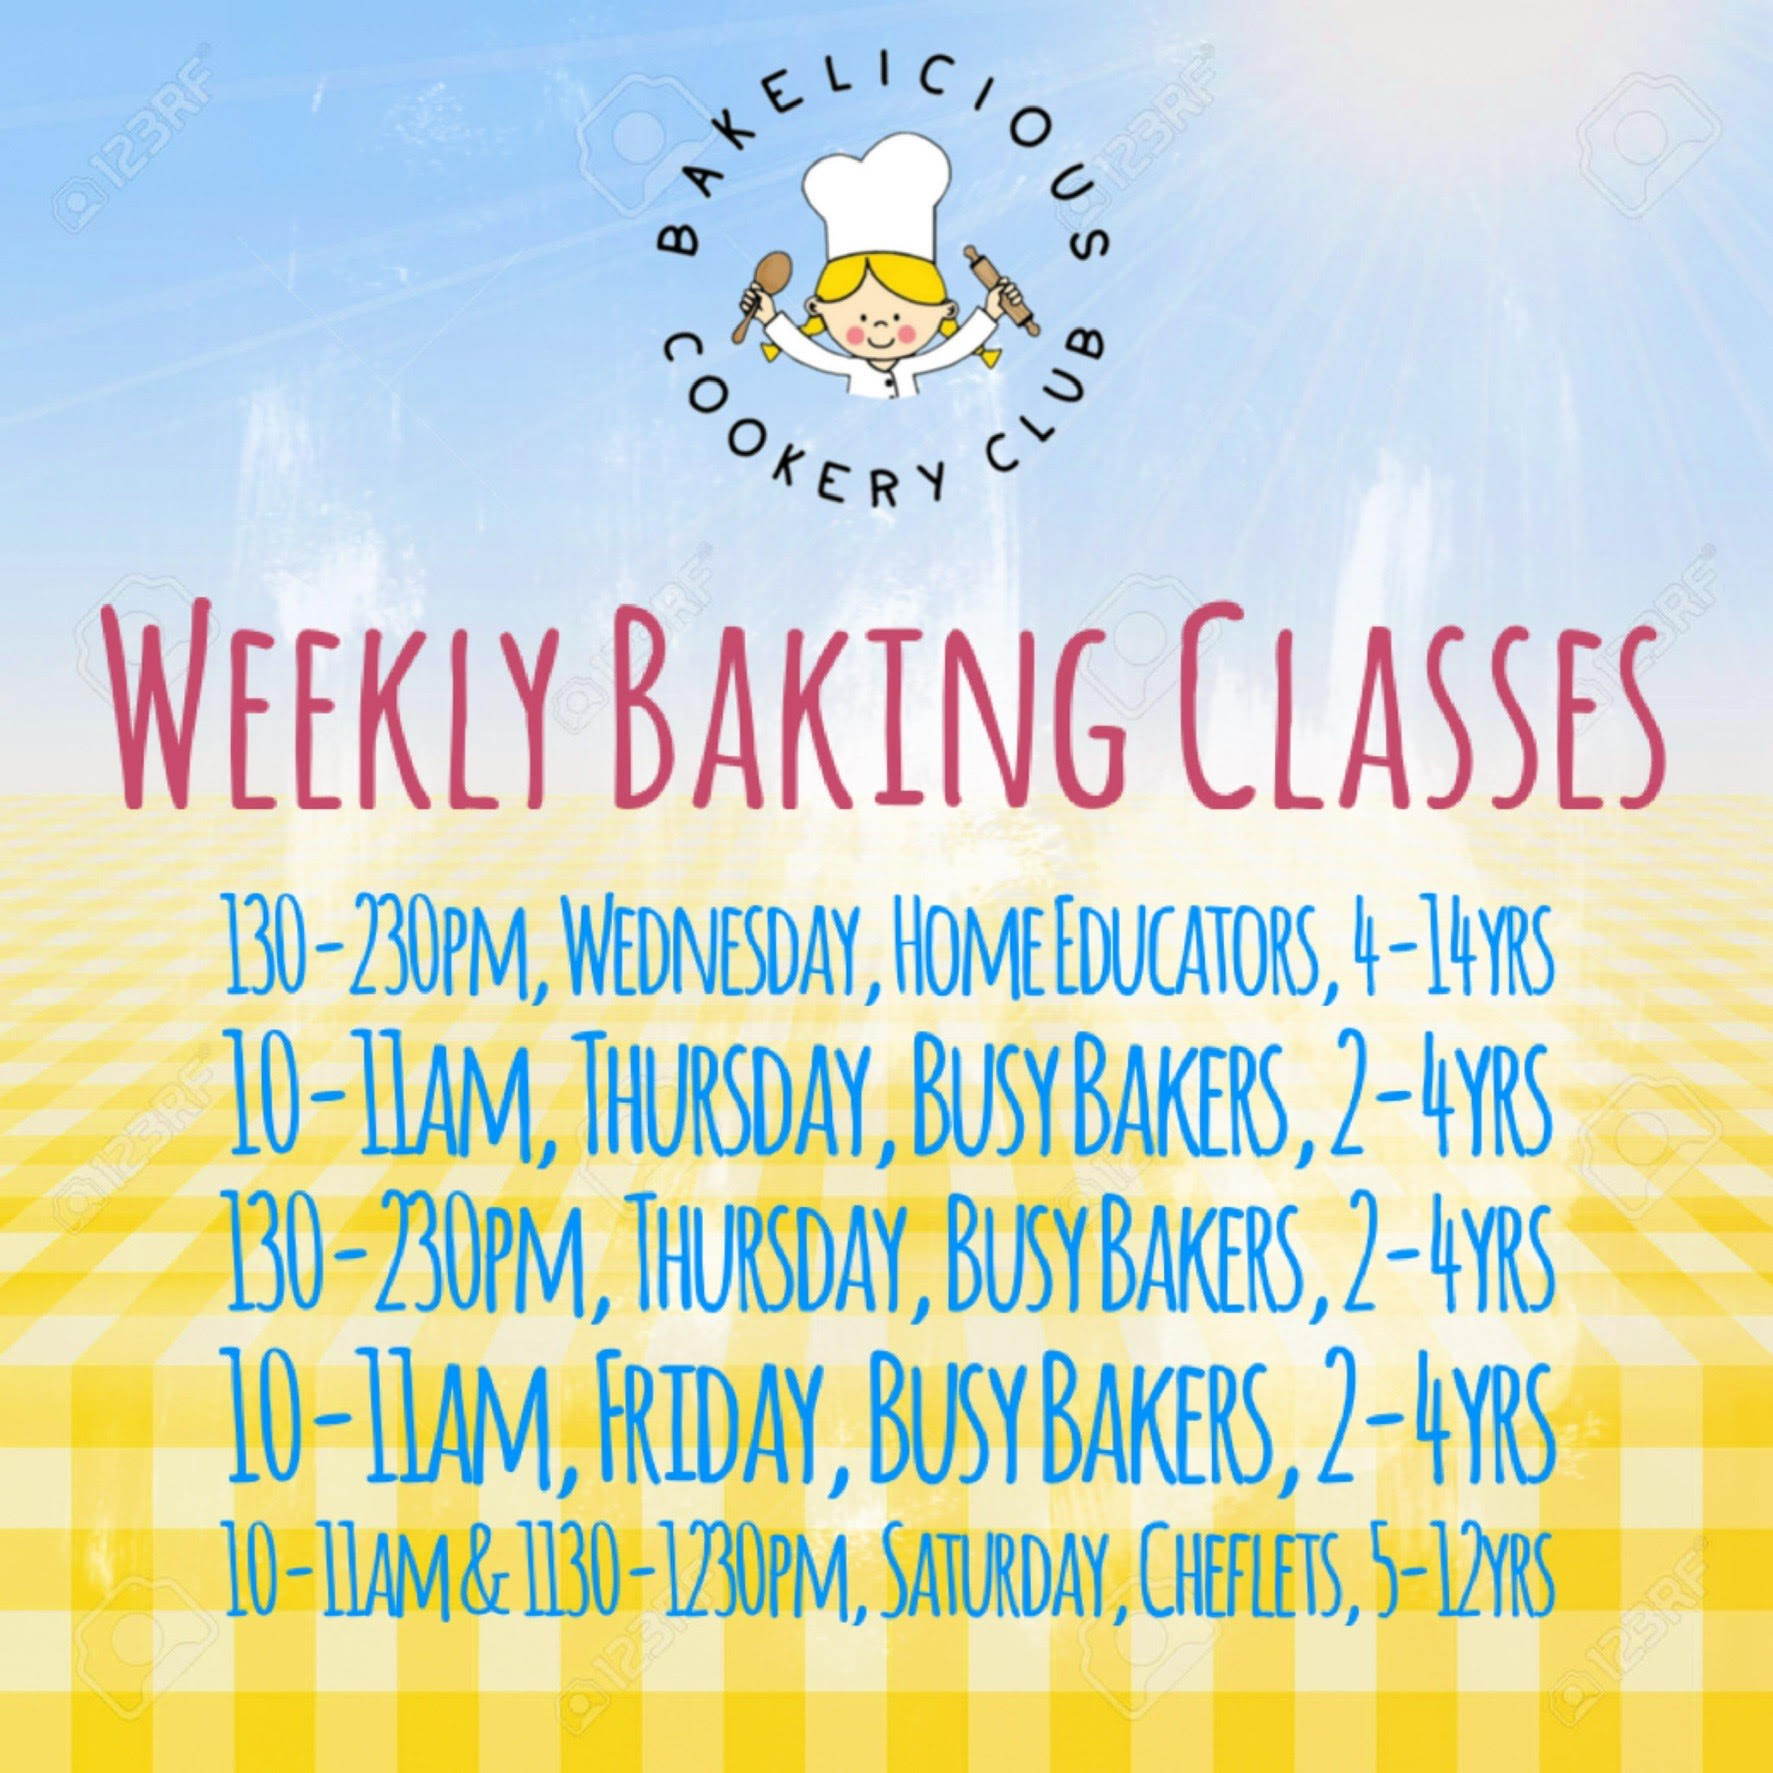 Bakelicious classes take place in Riddings on Thursdays